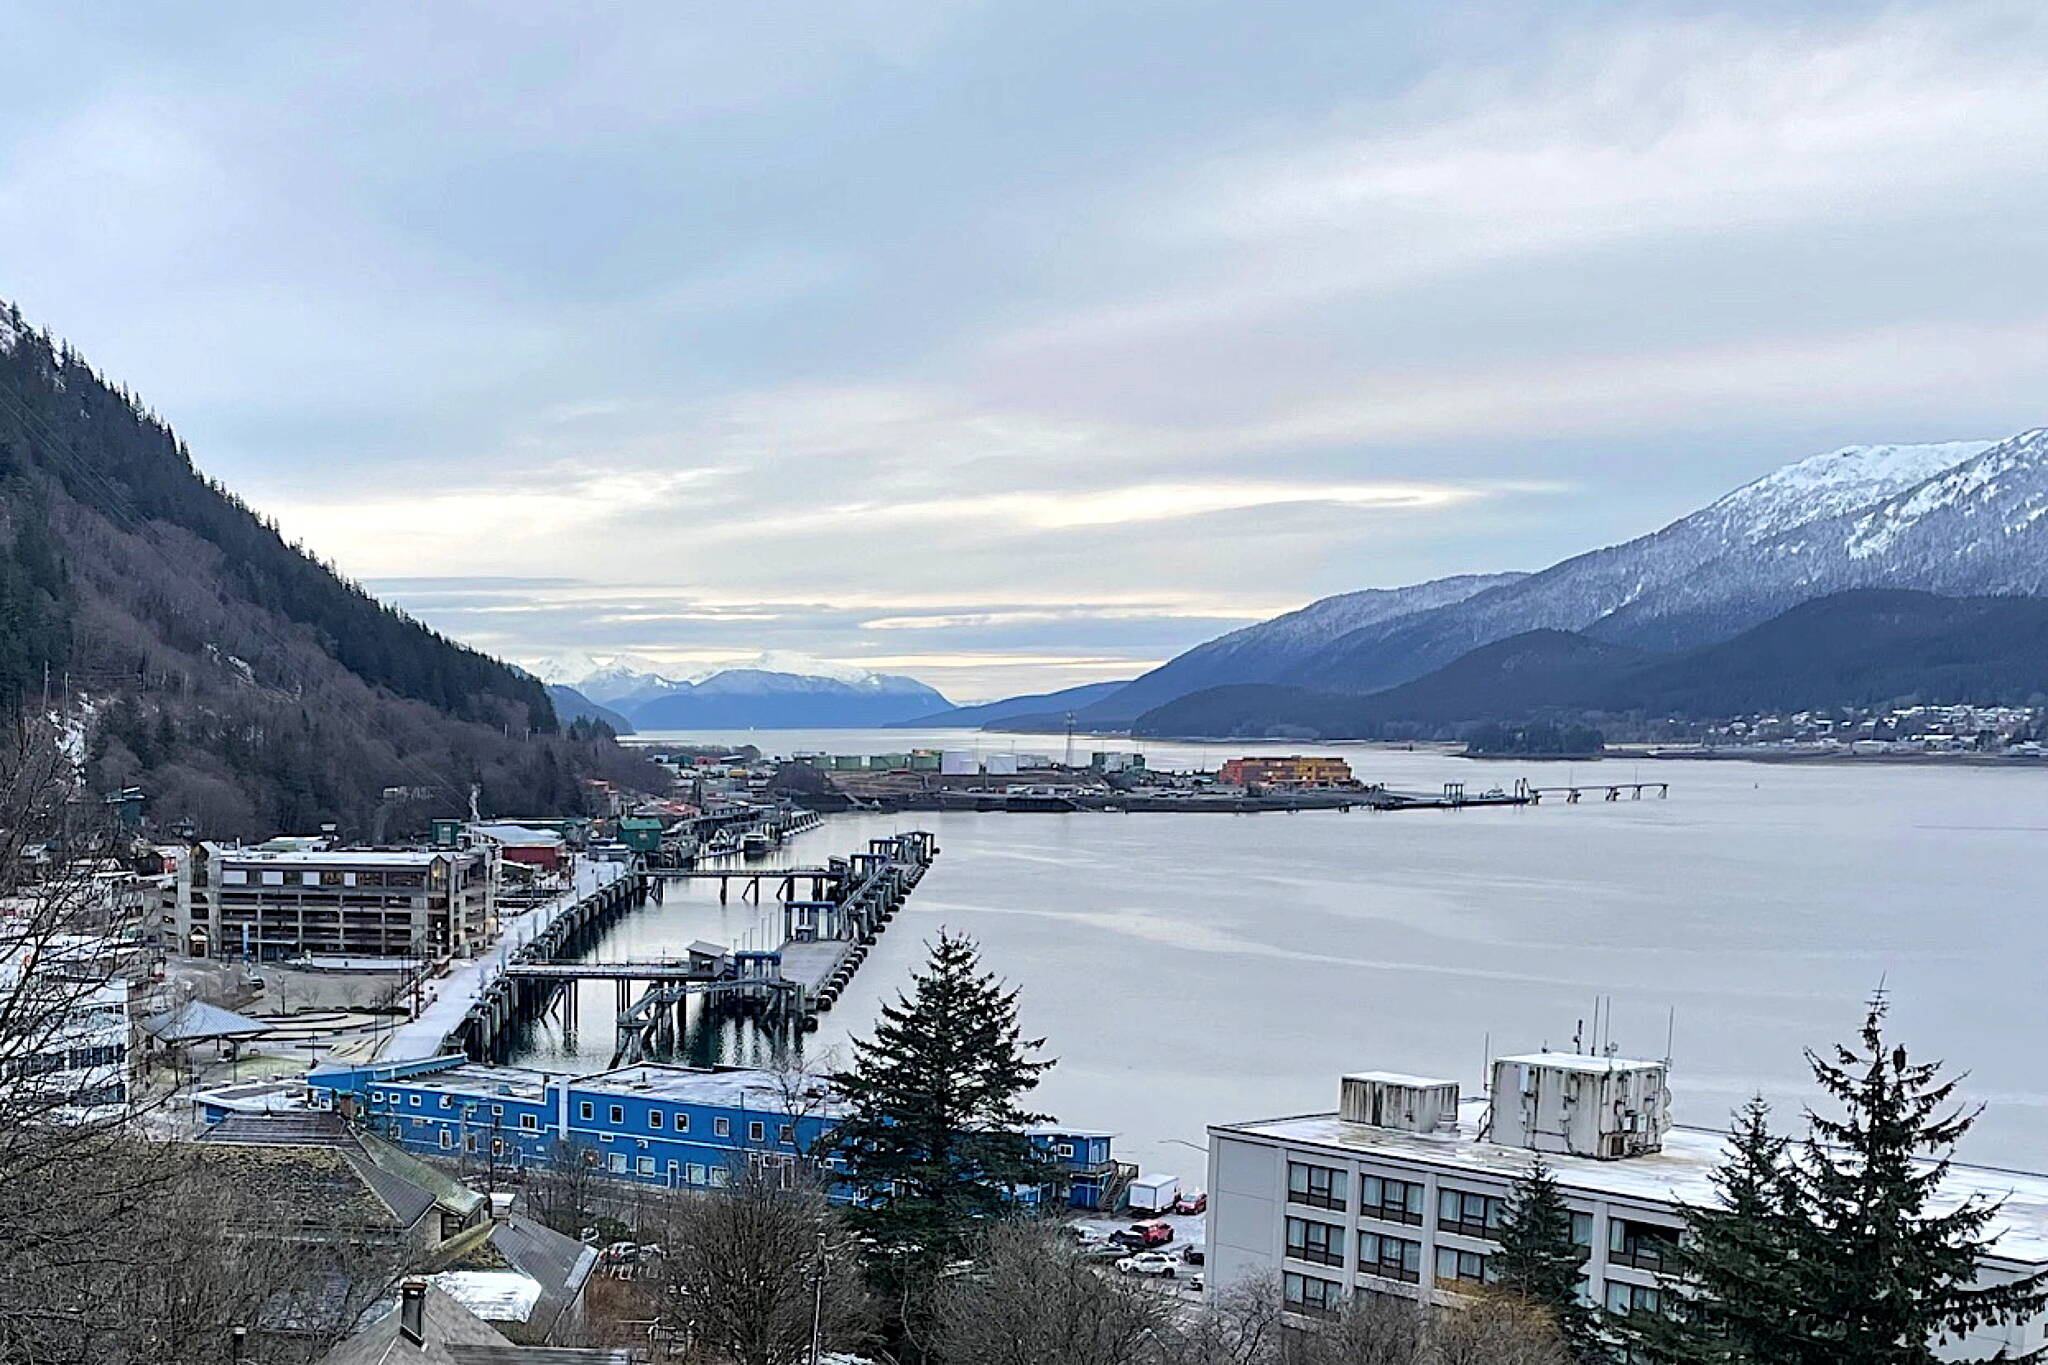 Looking south from downtown Juneau in December 2023 with buildings and docks in the foreground, the rock dump can be seen jutting into Gastineau Channel and providing a weather-protected harbor for Juneau. (Photo by Laurie Craig)